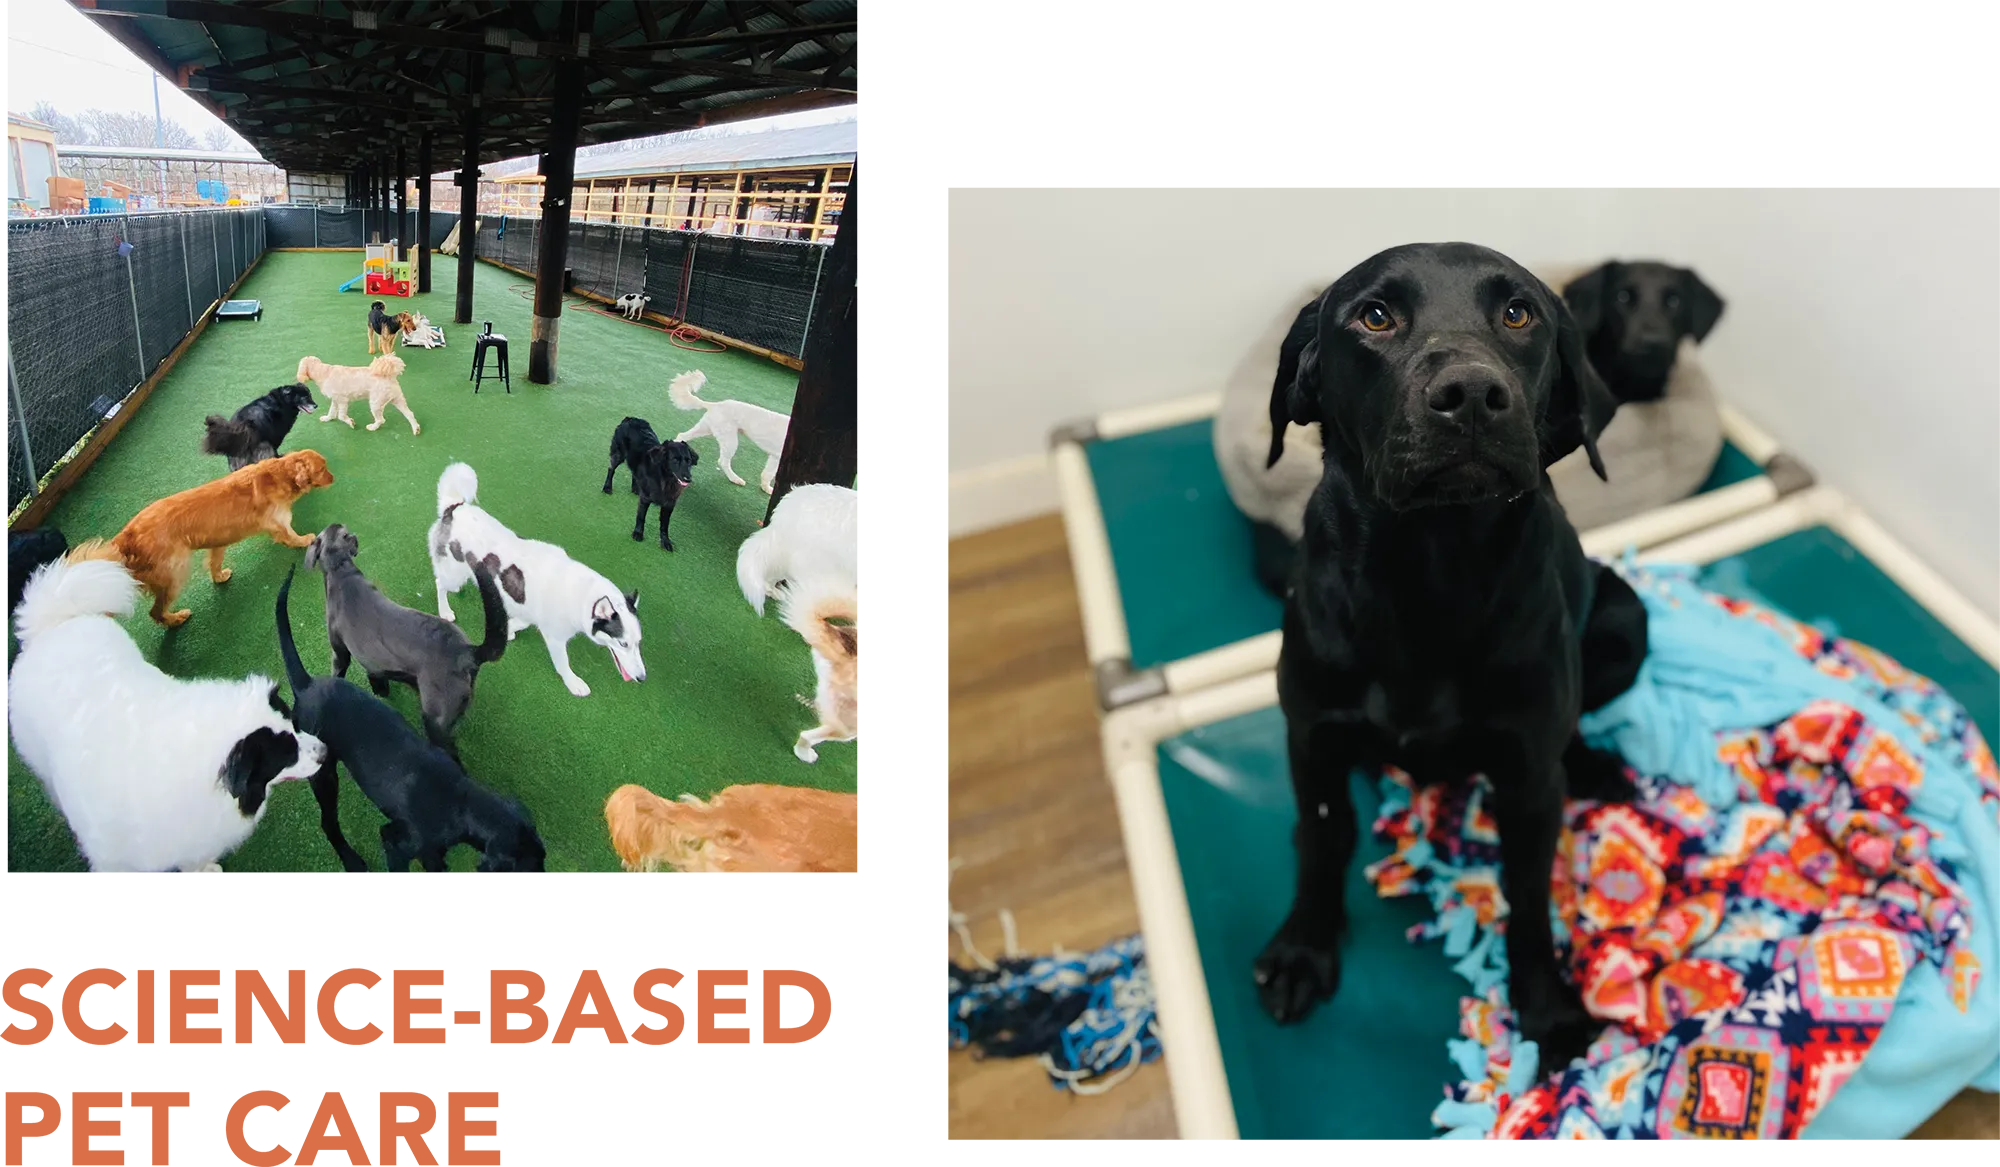 Science-Based Pet Care typography; group of dogs at a daycare; two black dogs on dog beds and blankets